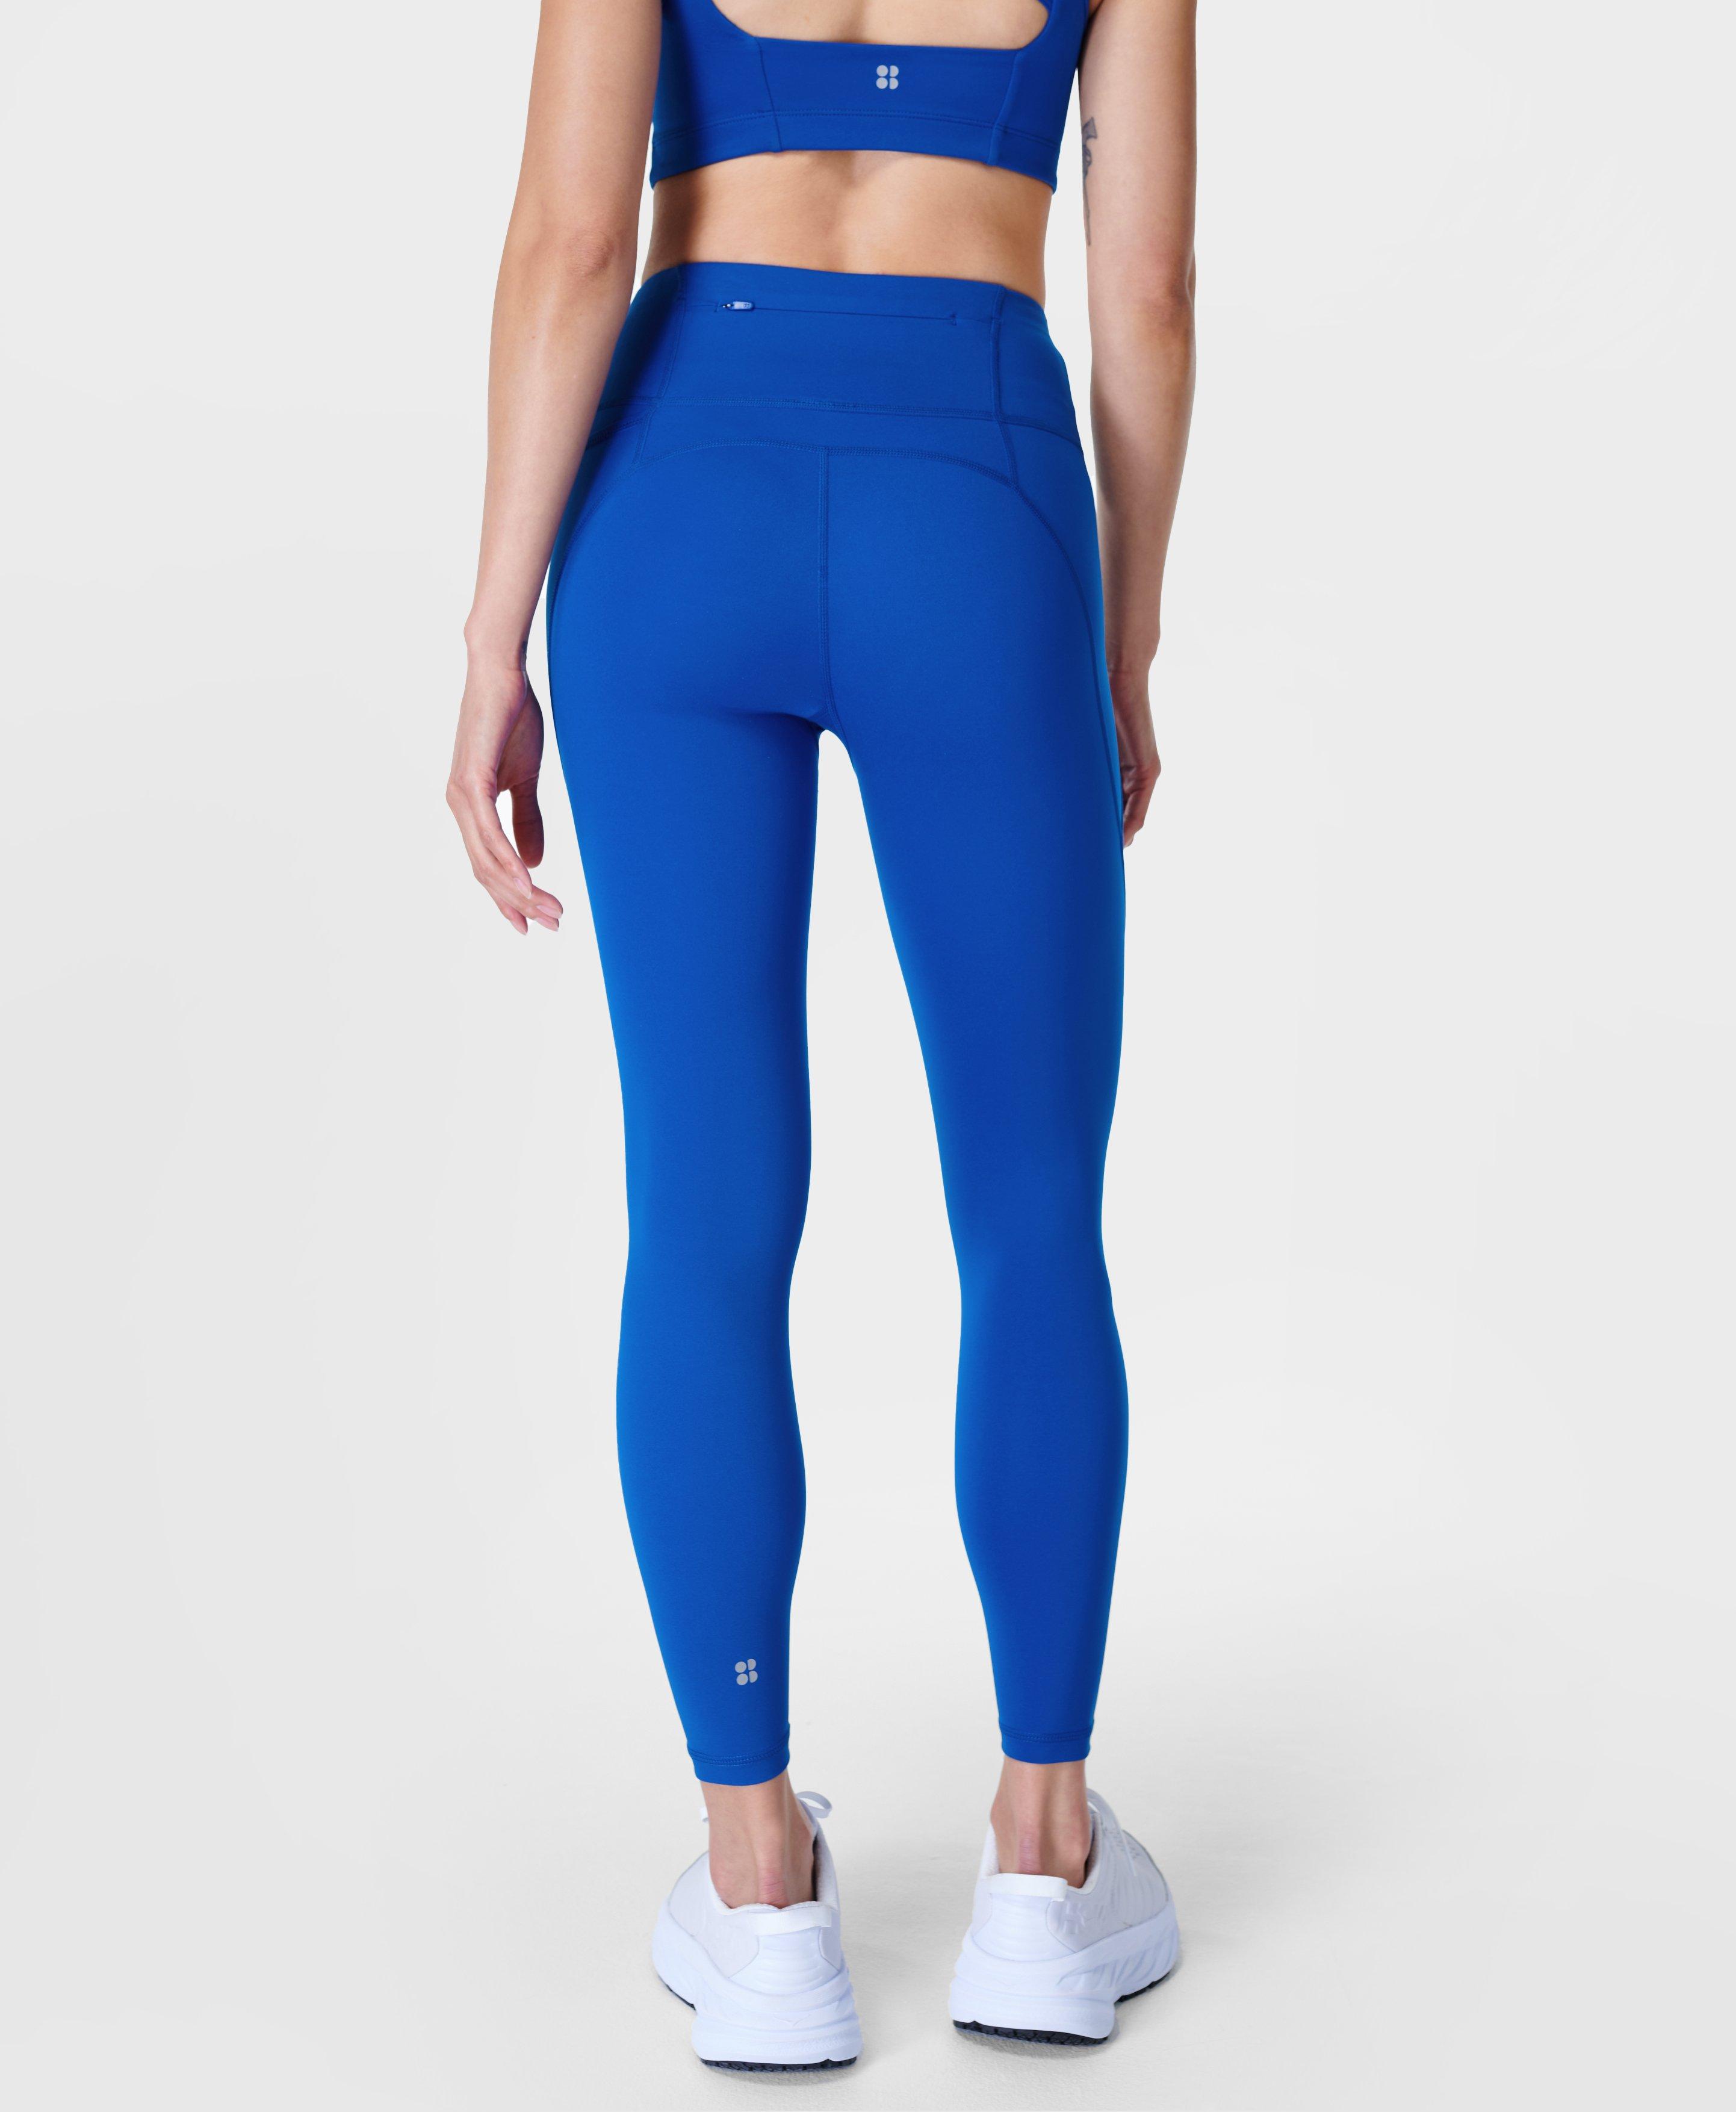 Blue tights. Express delivery